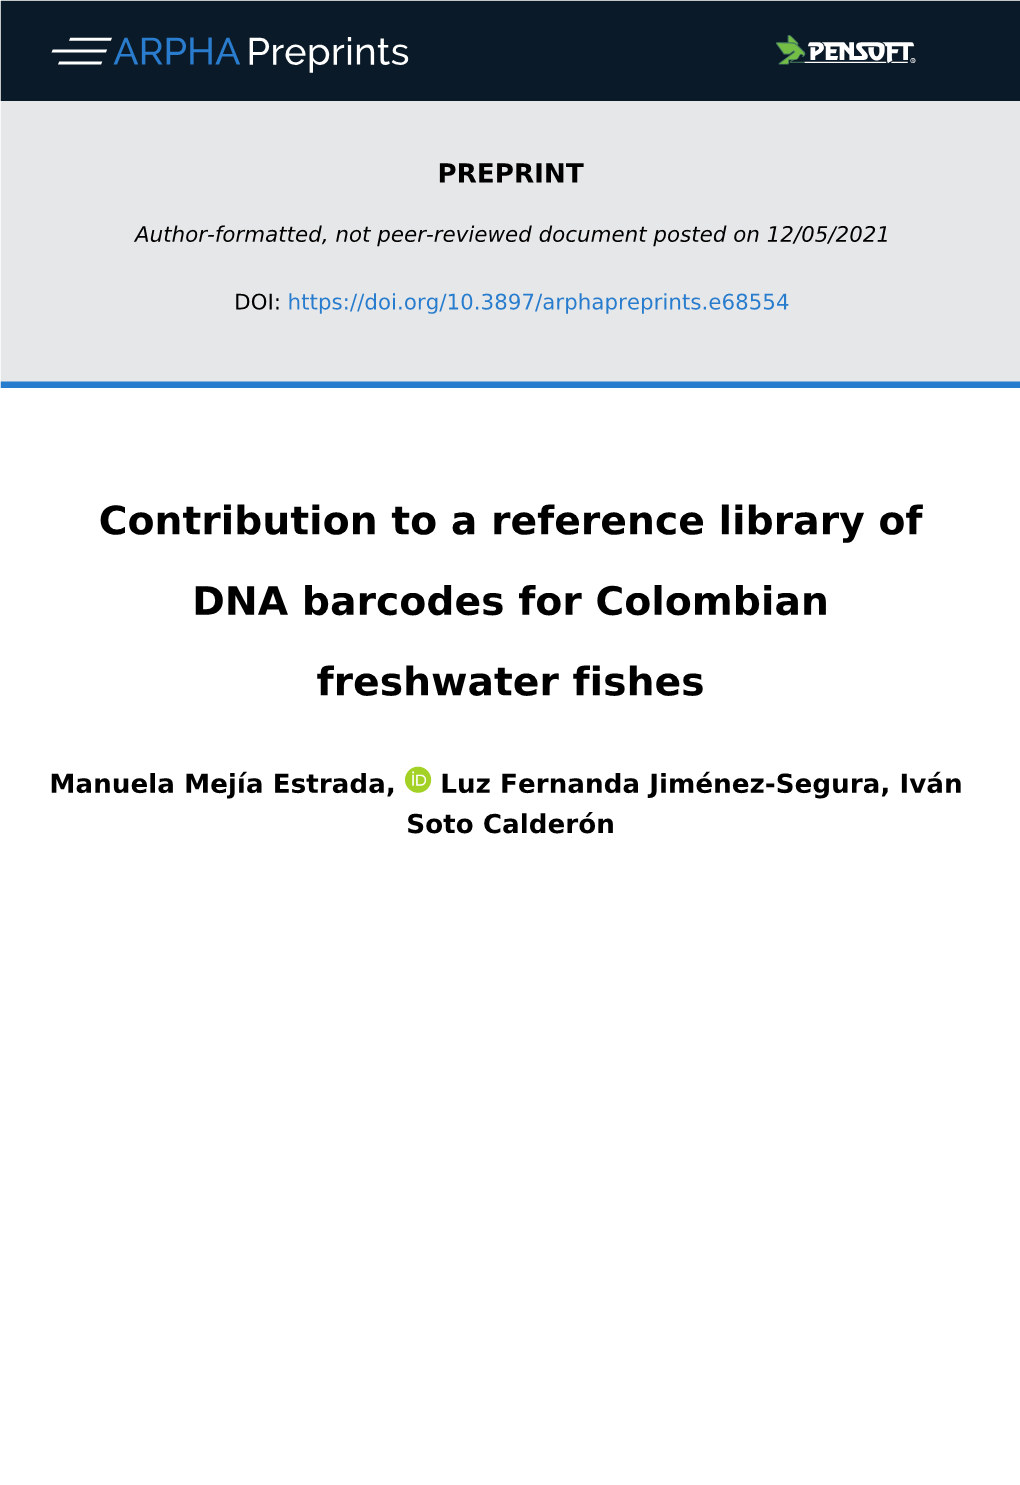 Contribution to a Reference Library of DNA Barcodes for Colombian Freshwater Fishes